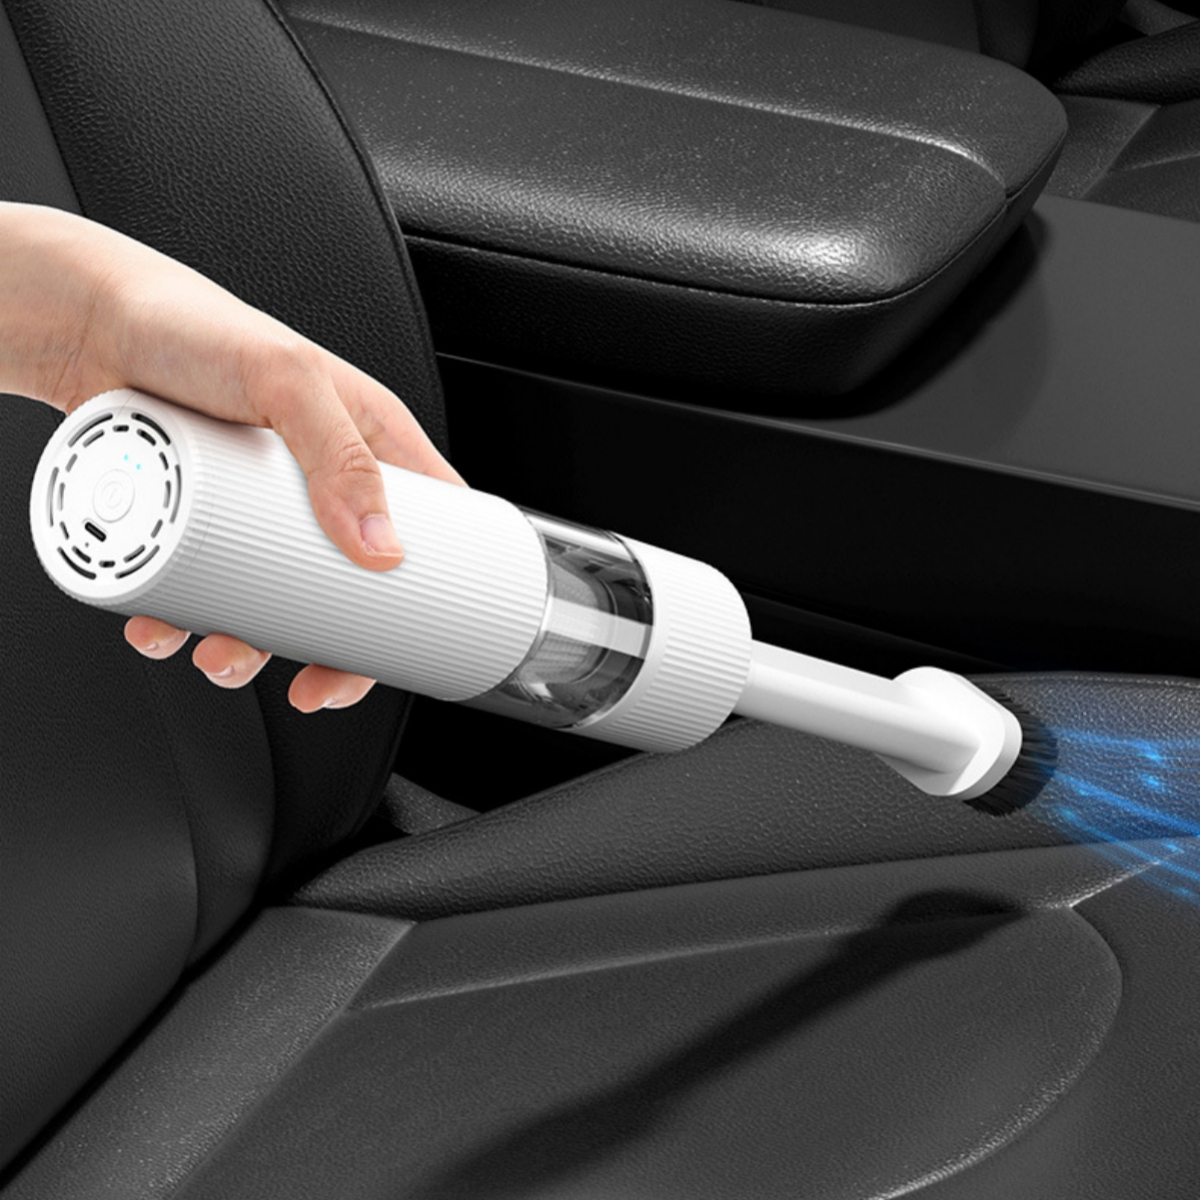 Rechargeable USB Powerful Powered by SHAOKE Home Handstaubsauger, Handheld Vacuum Cleaner Cordless Portable Staubsauger